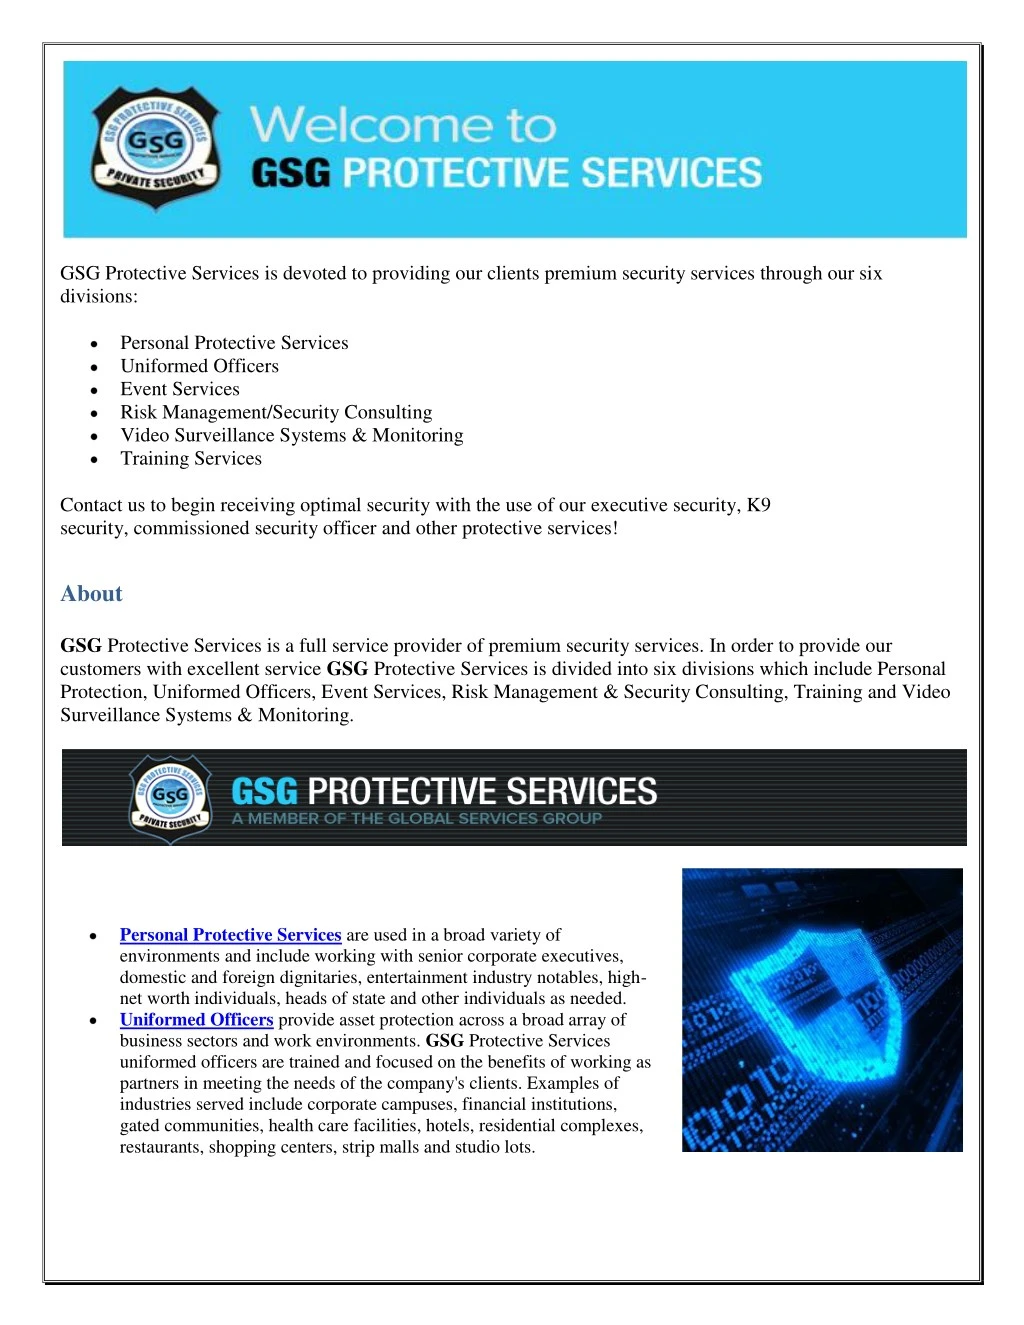 gsg protective services is devoted to providing